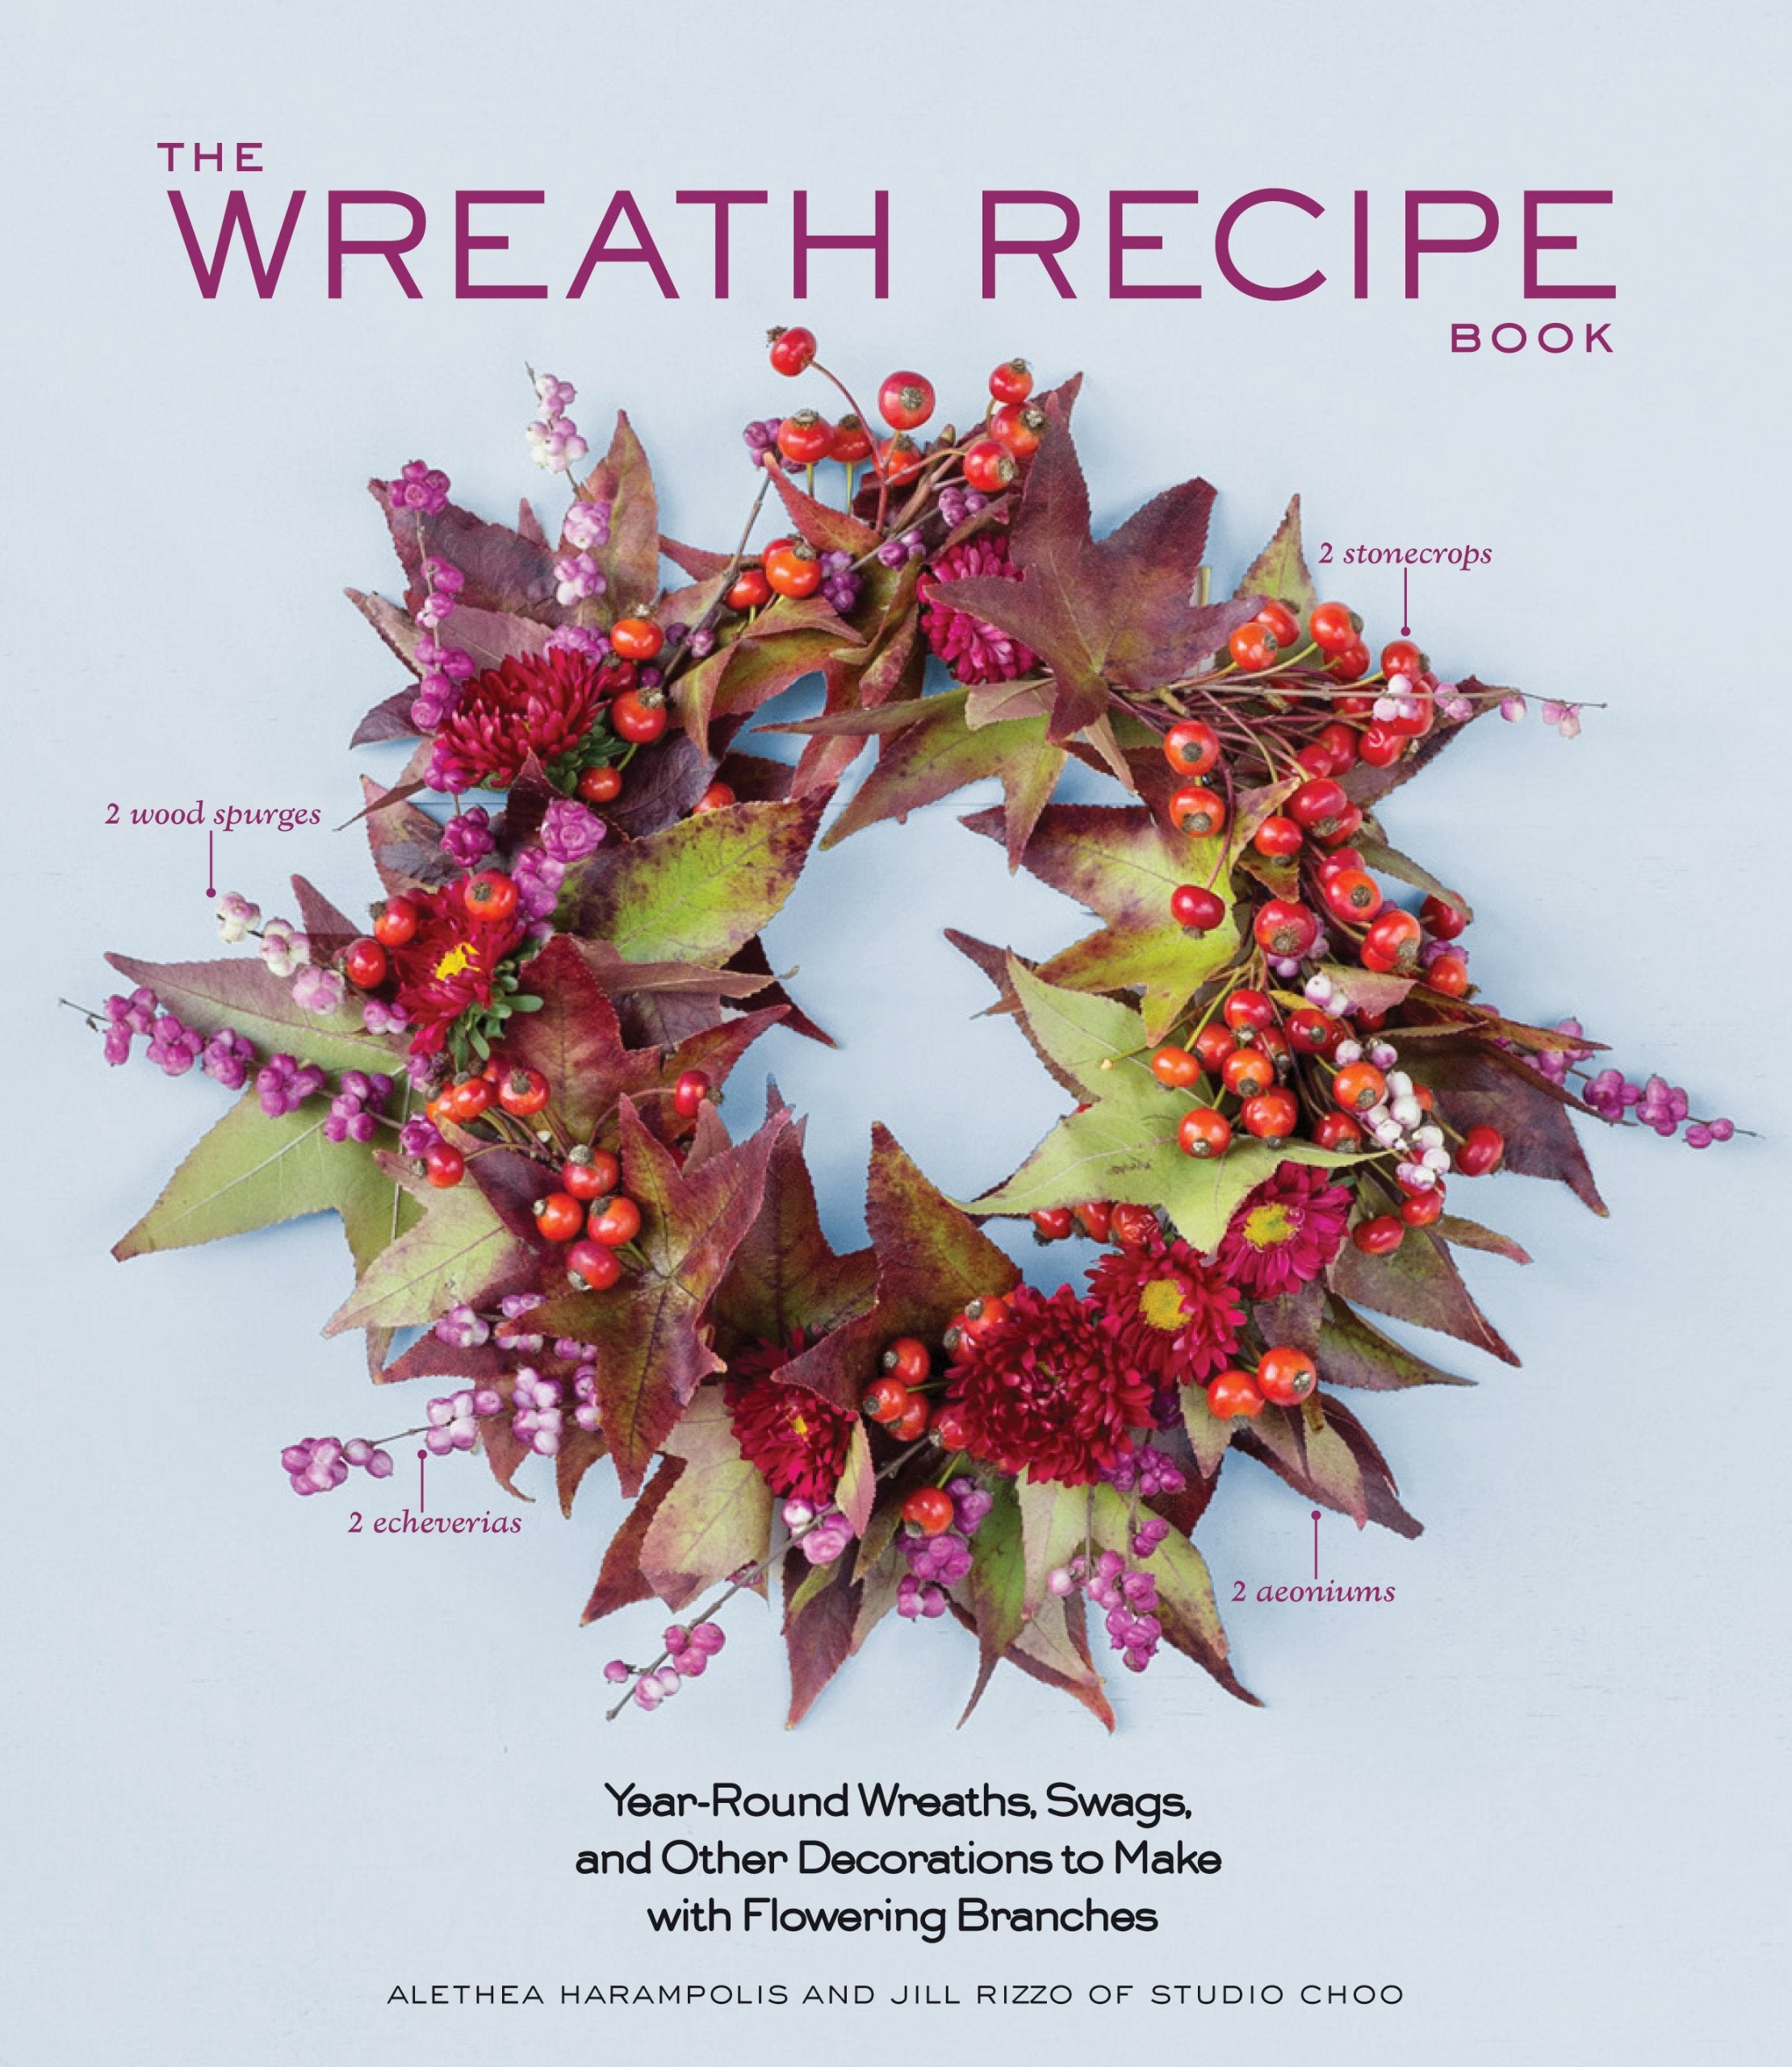 Livre ISBN 1579655599 The Wreath Recipe Book: Year-Round Wreaths, Swags, and Other Decorations to Make with Seasonal Branches (Jill Rizzo)